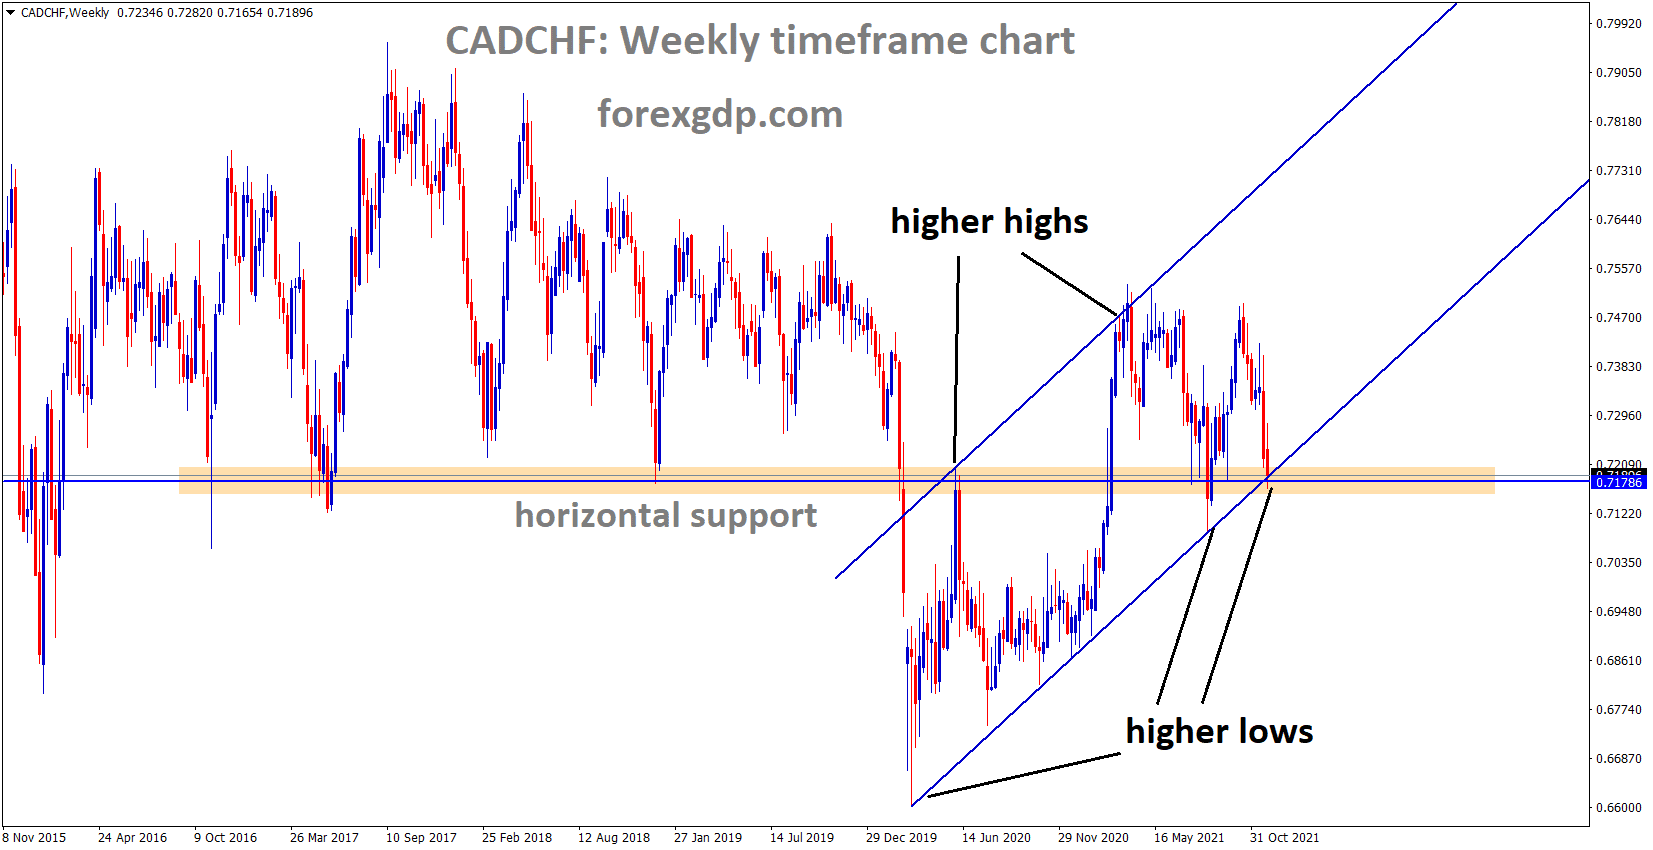 CADCHF is moving in an ascending channel and the market reached the horizontal support area of the channel